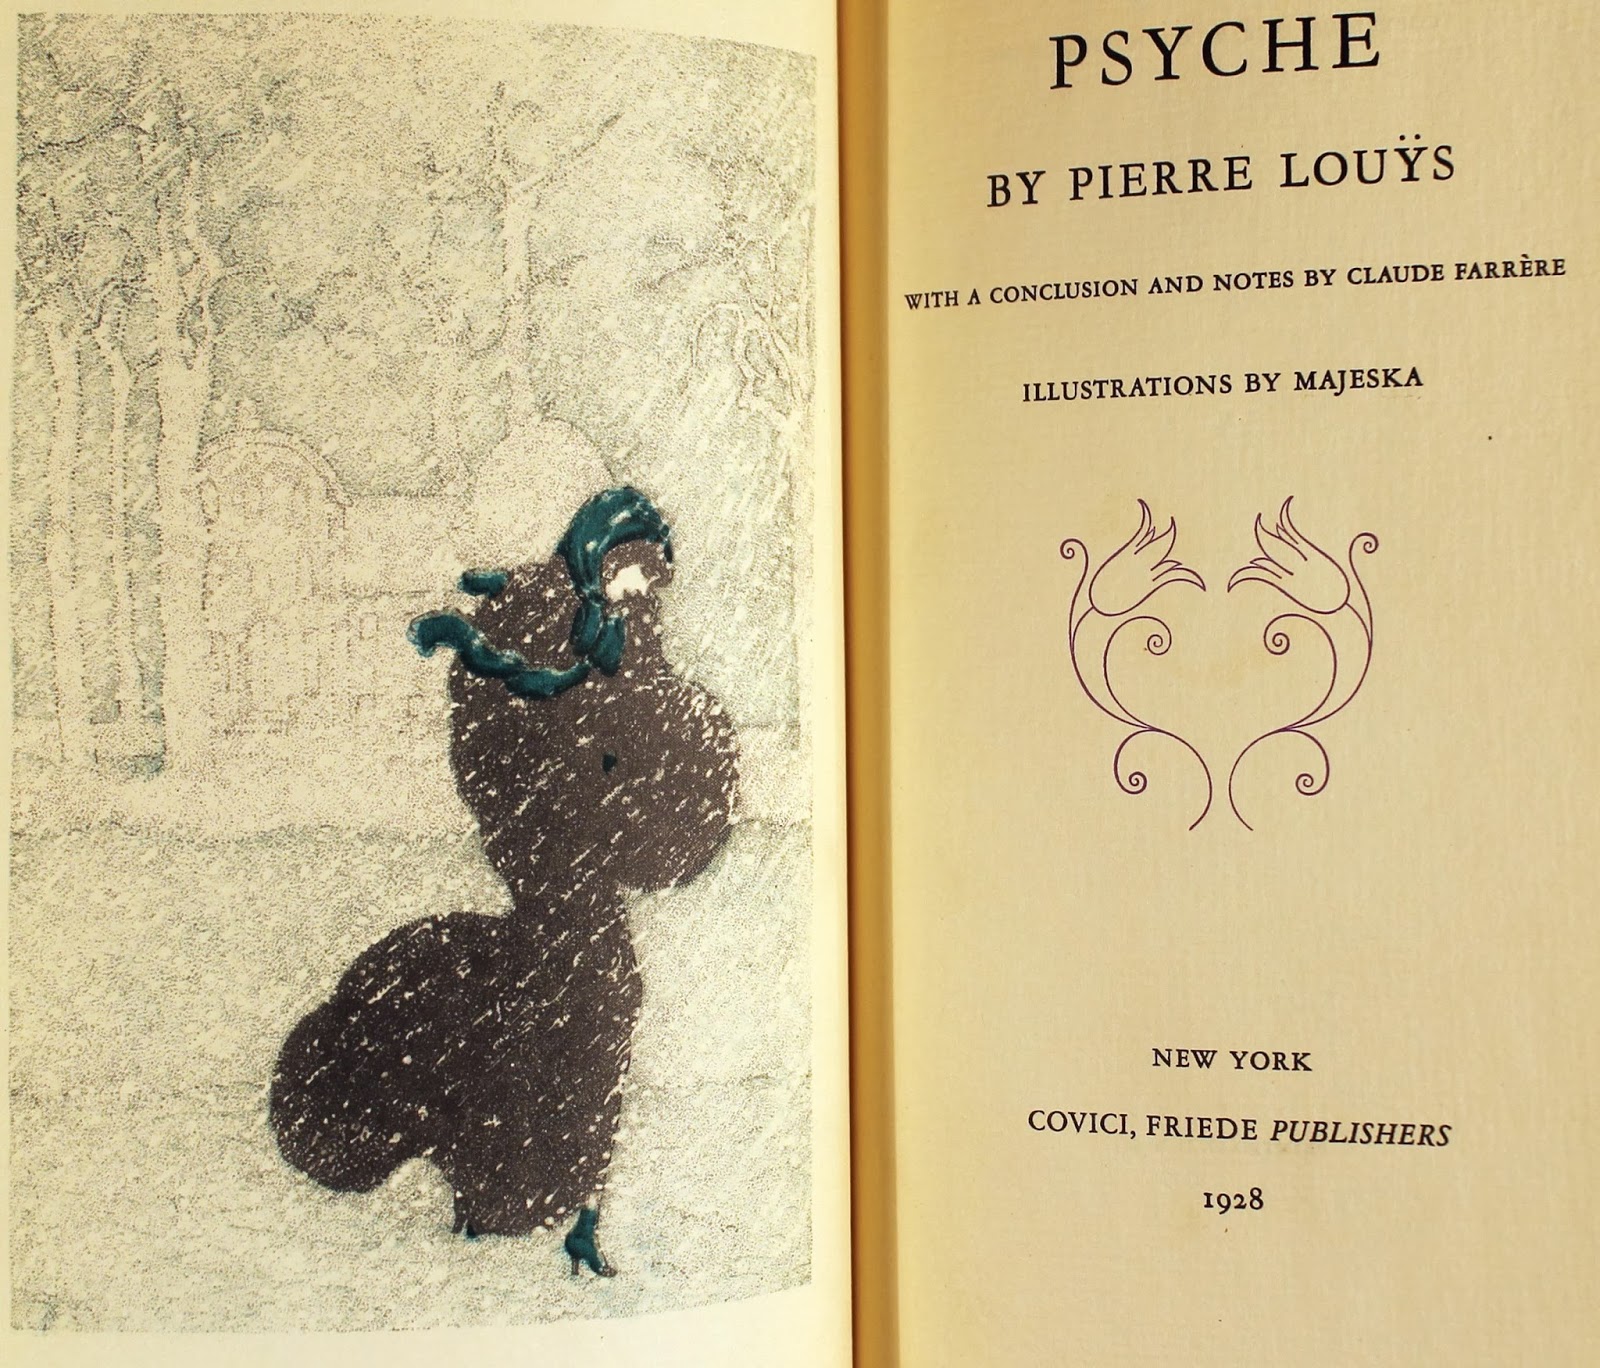 Illustration by Majeska in the book "Psyche" by Pierre Louys